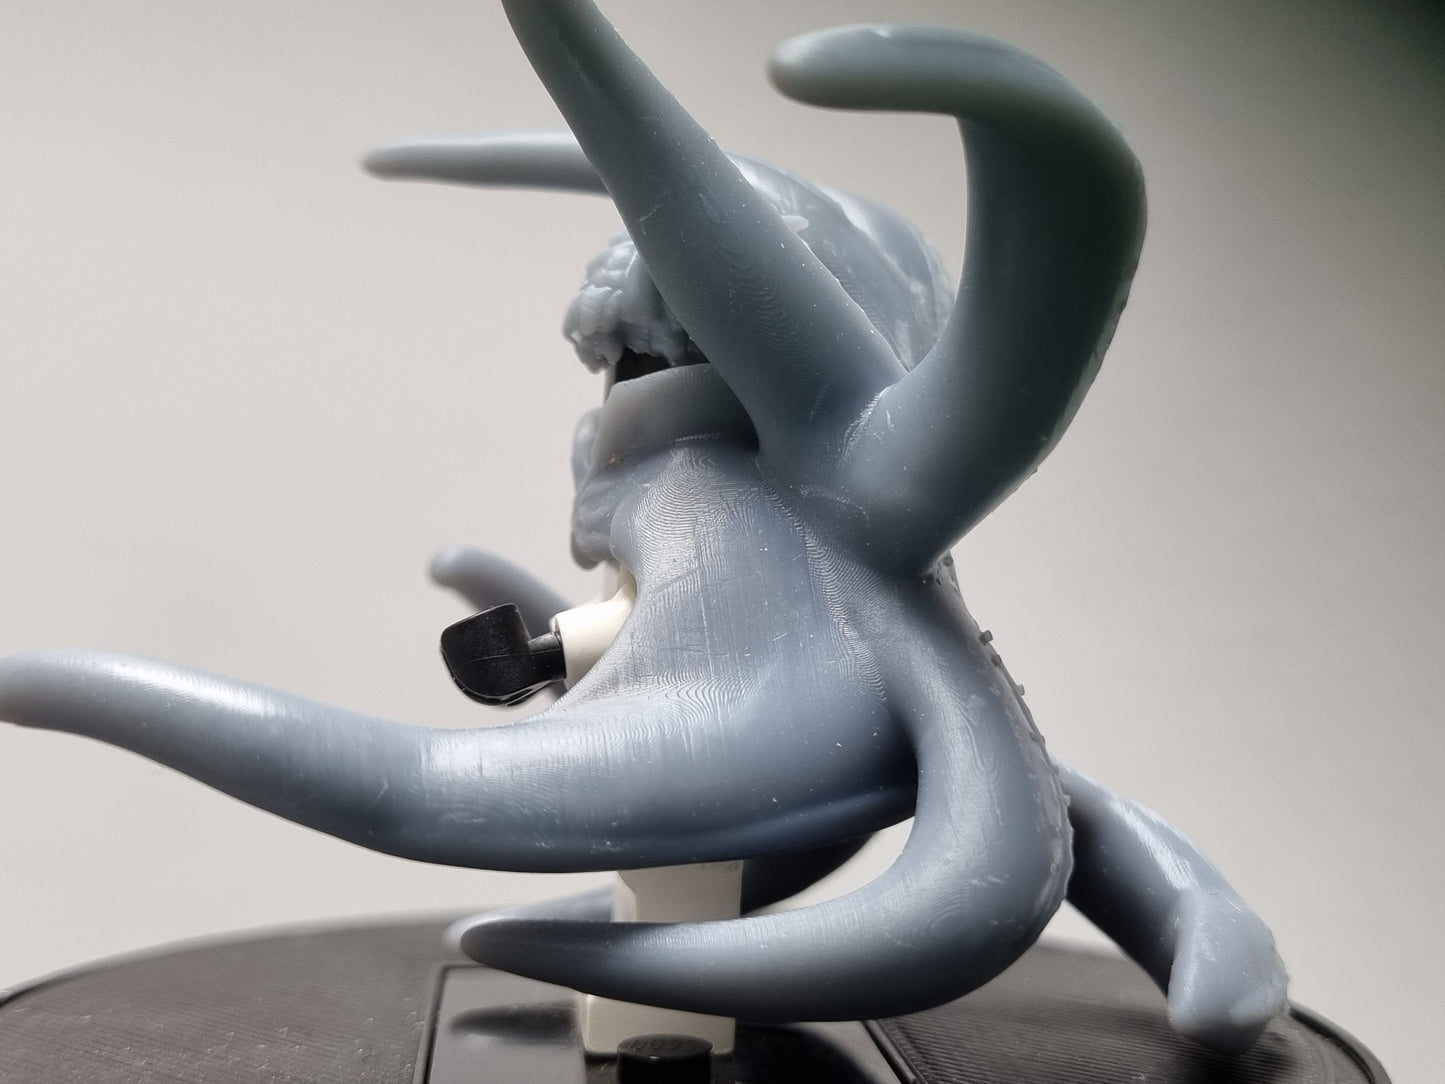 Building toy custom 3D printed tentical mode!